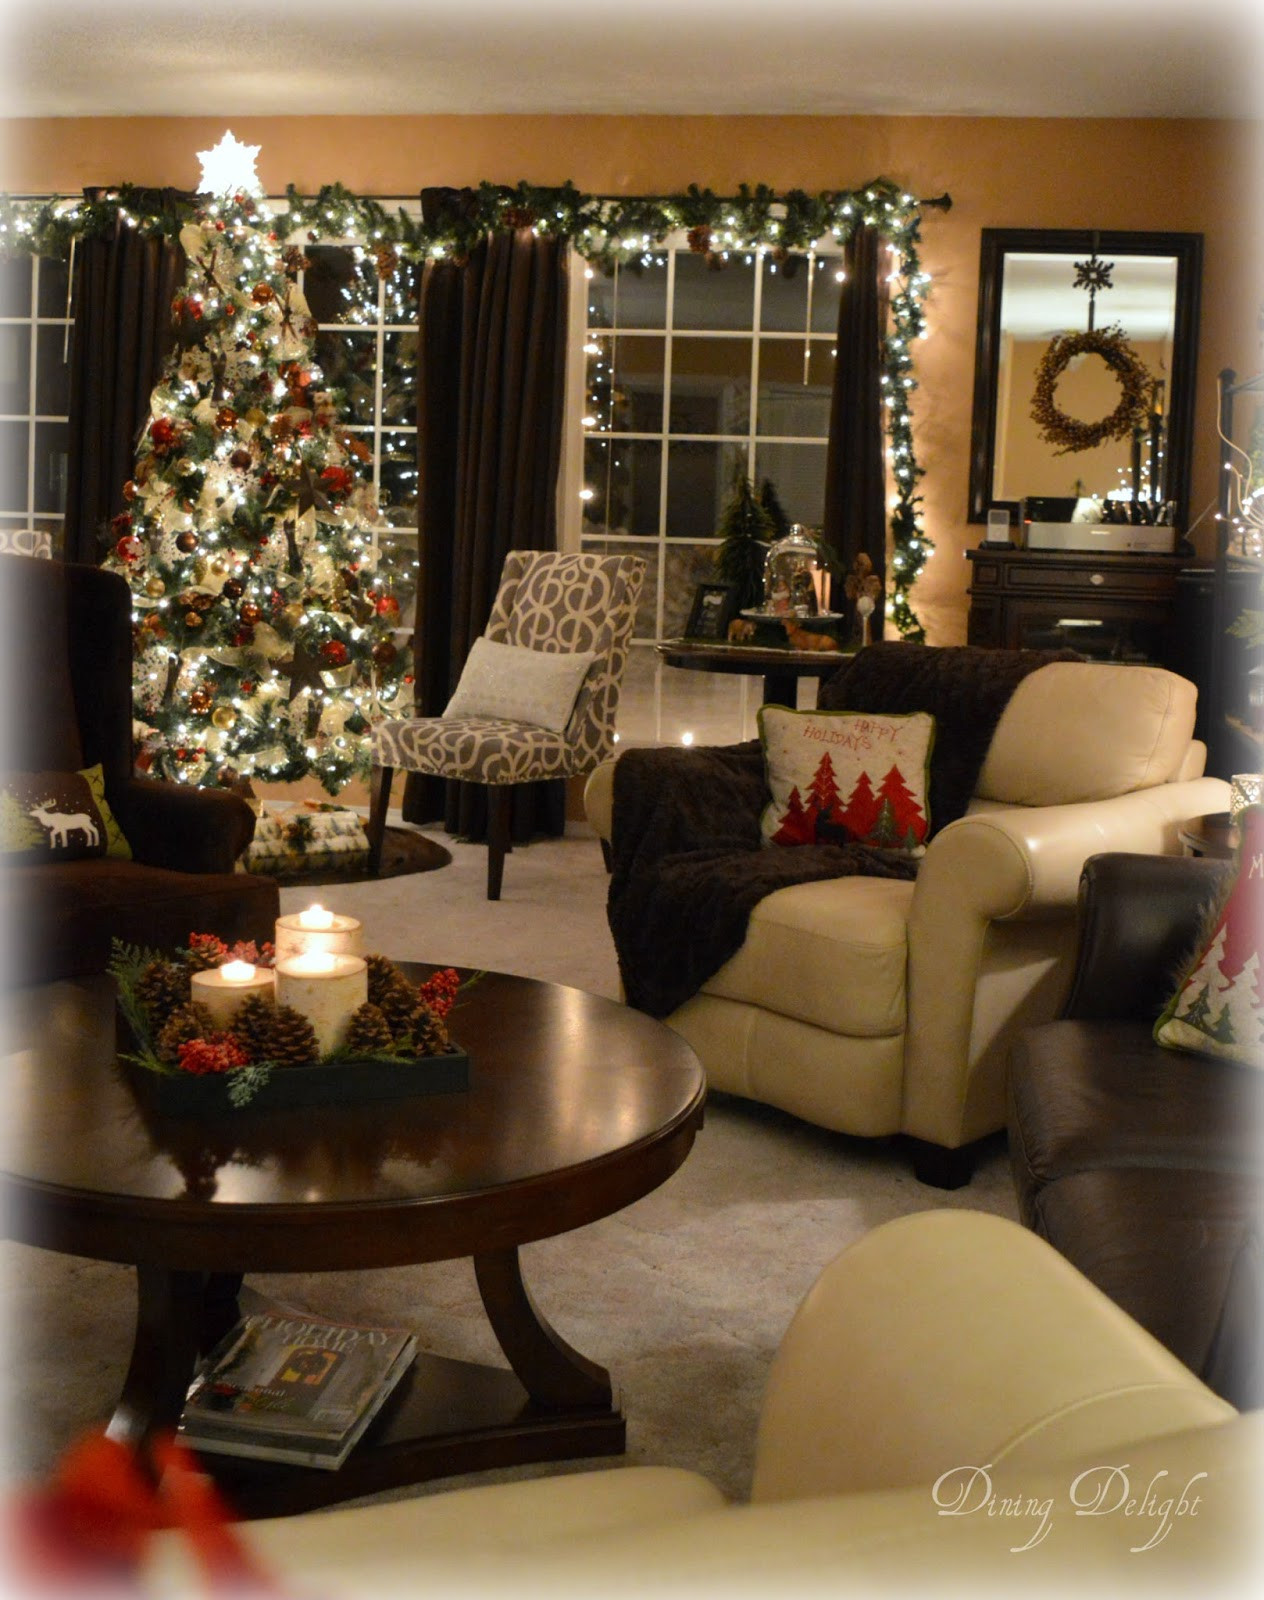 Cozy Christmas Living Room
 Dining Delight Holiday Home Tour Christmas in a Cozy House